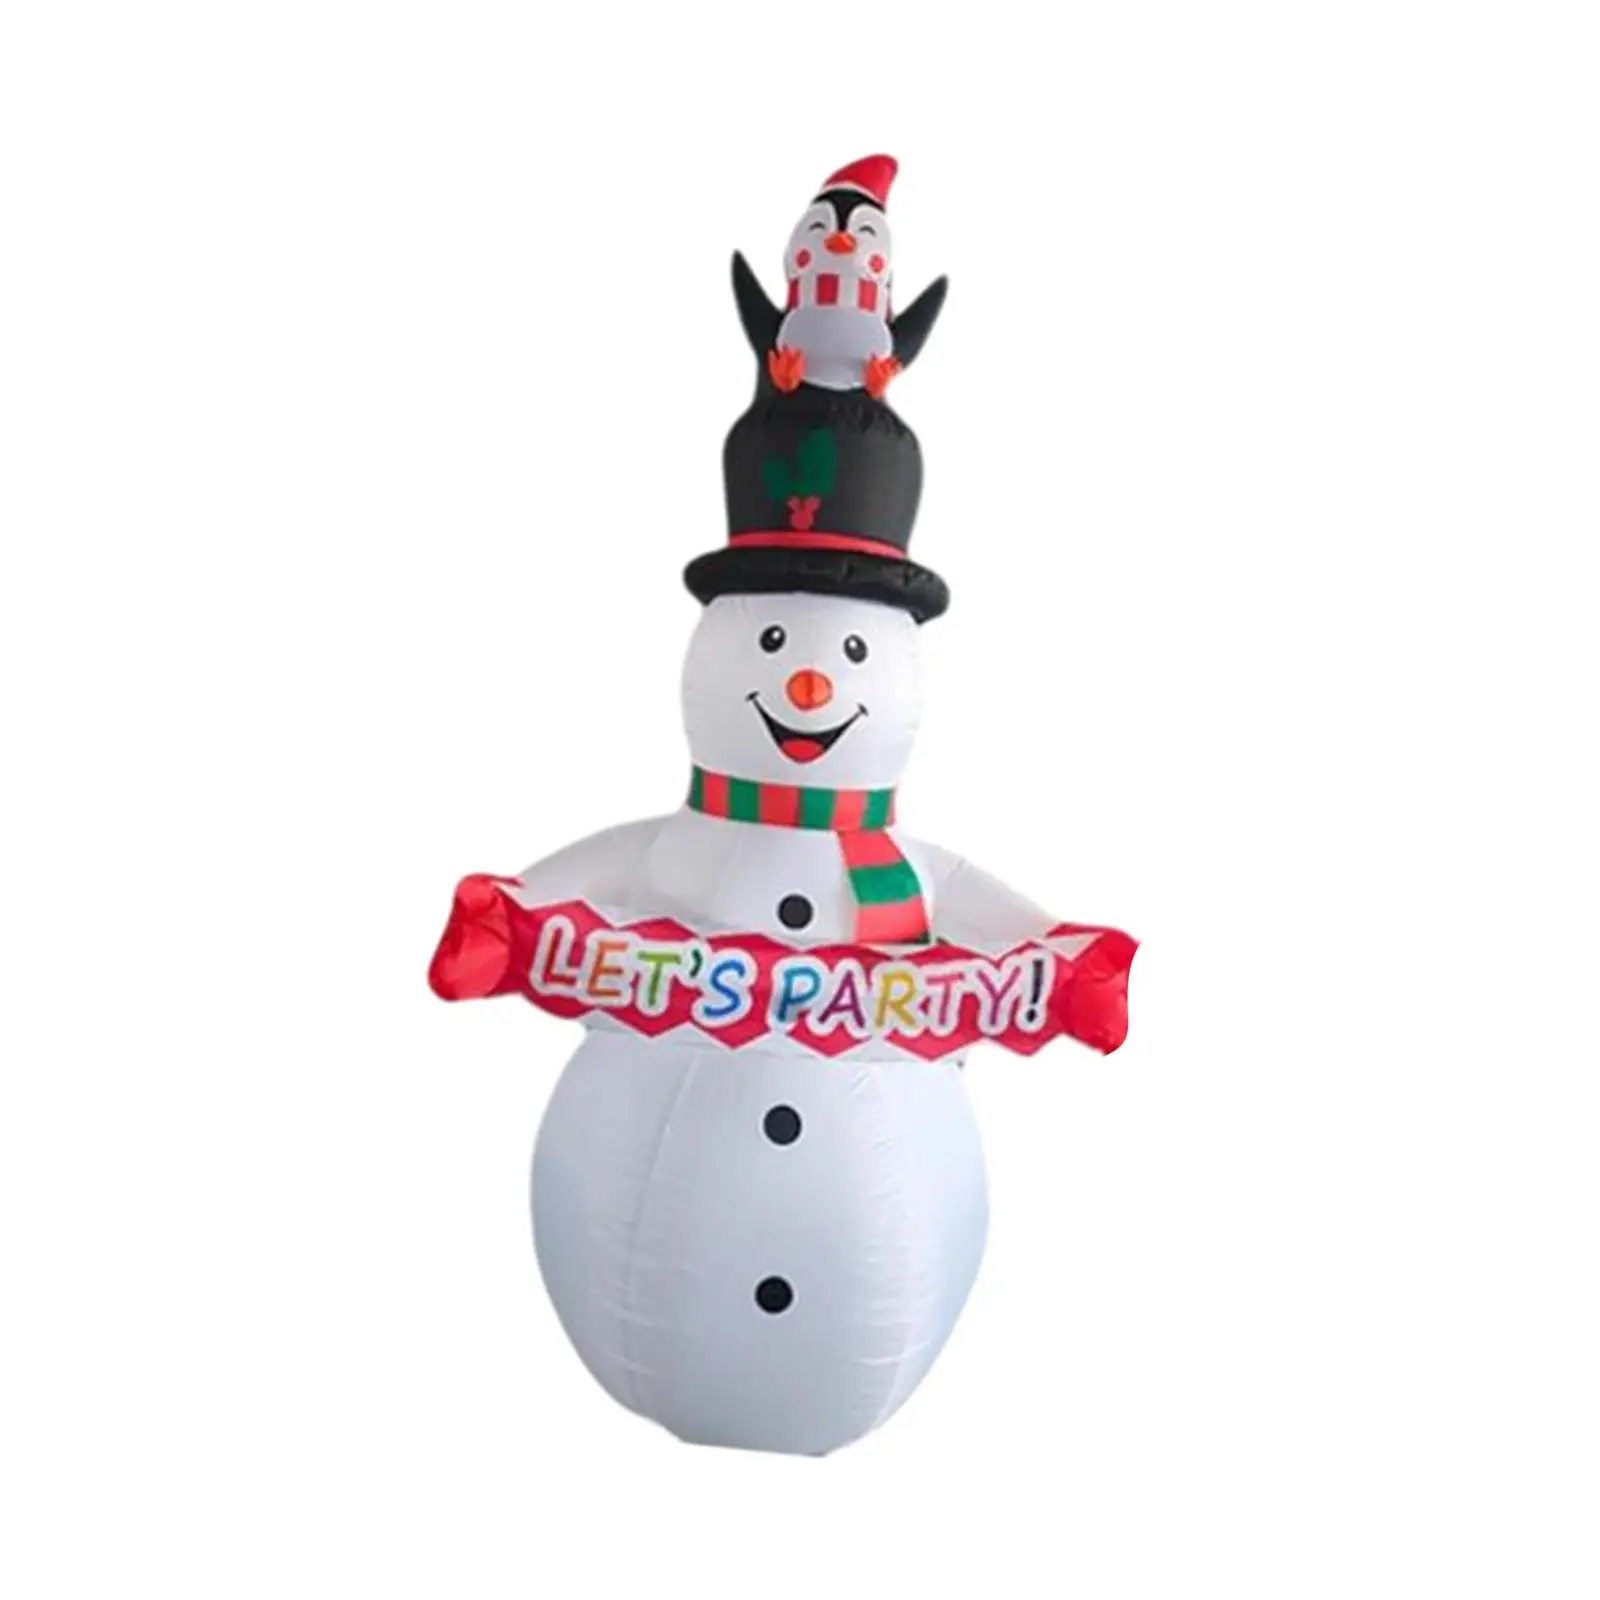 Blow up Snow Man Funny Props Luminous Ornament Large Christmas Decor Inflatable Snowman for Winter Vacation Lawn Outdoor Garden